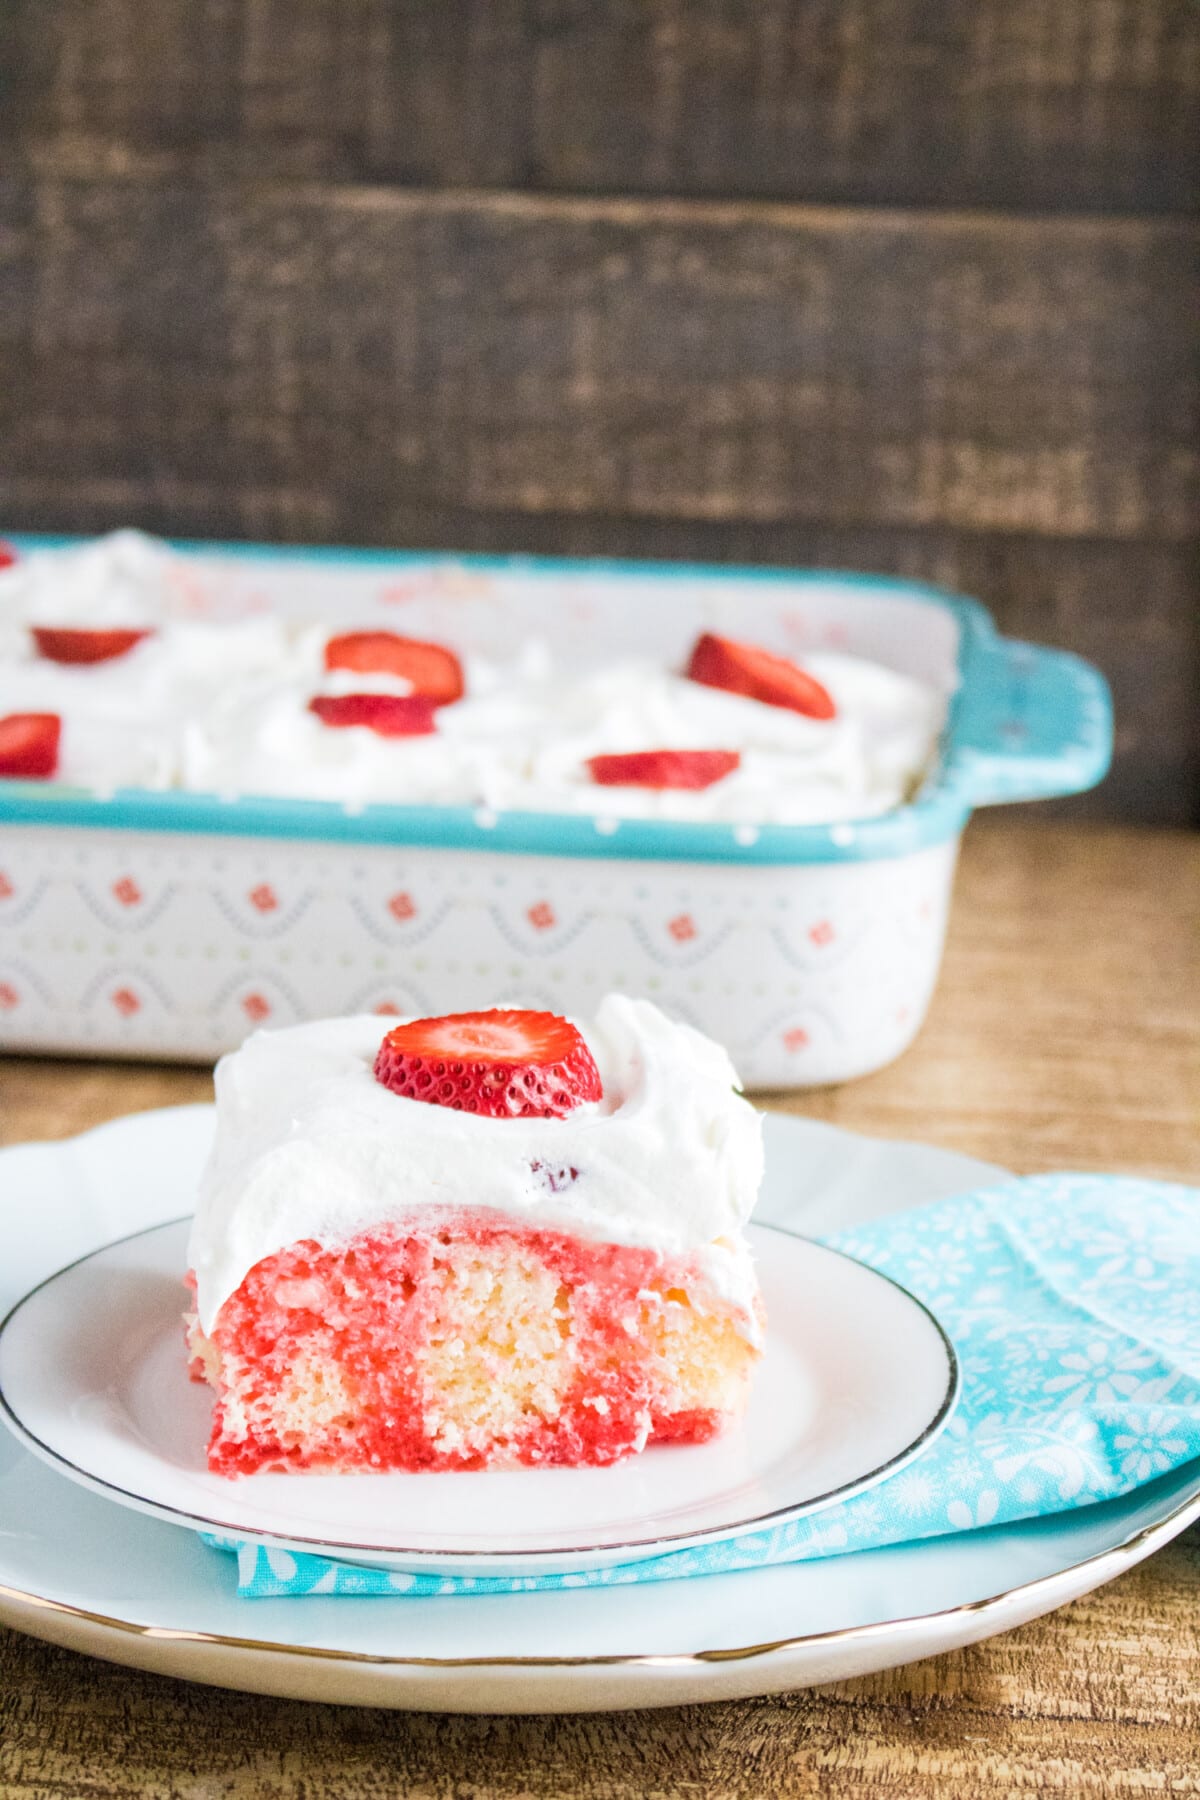 Strawberry Poke Cake on a wooden table.
